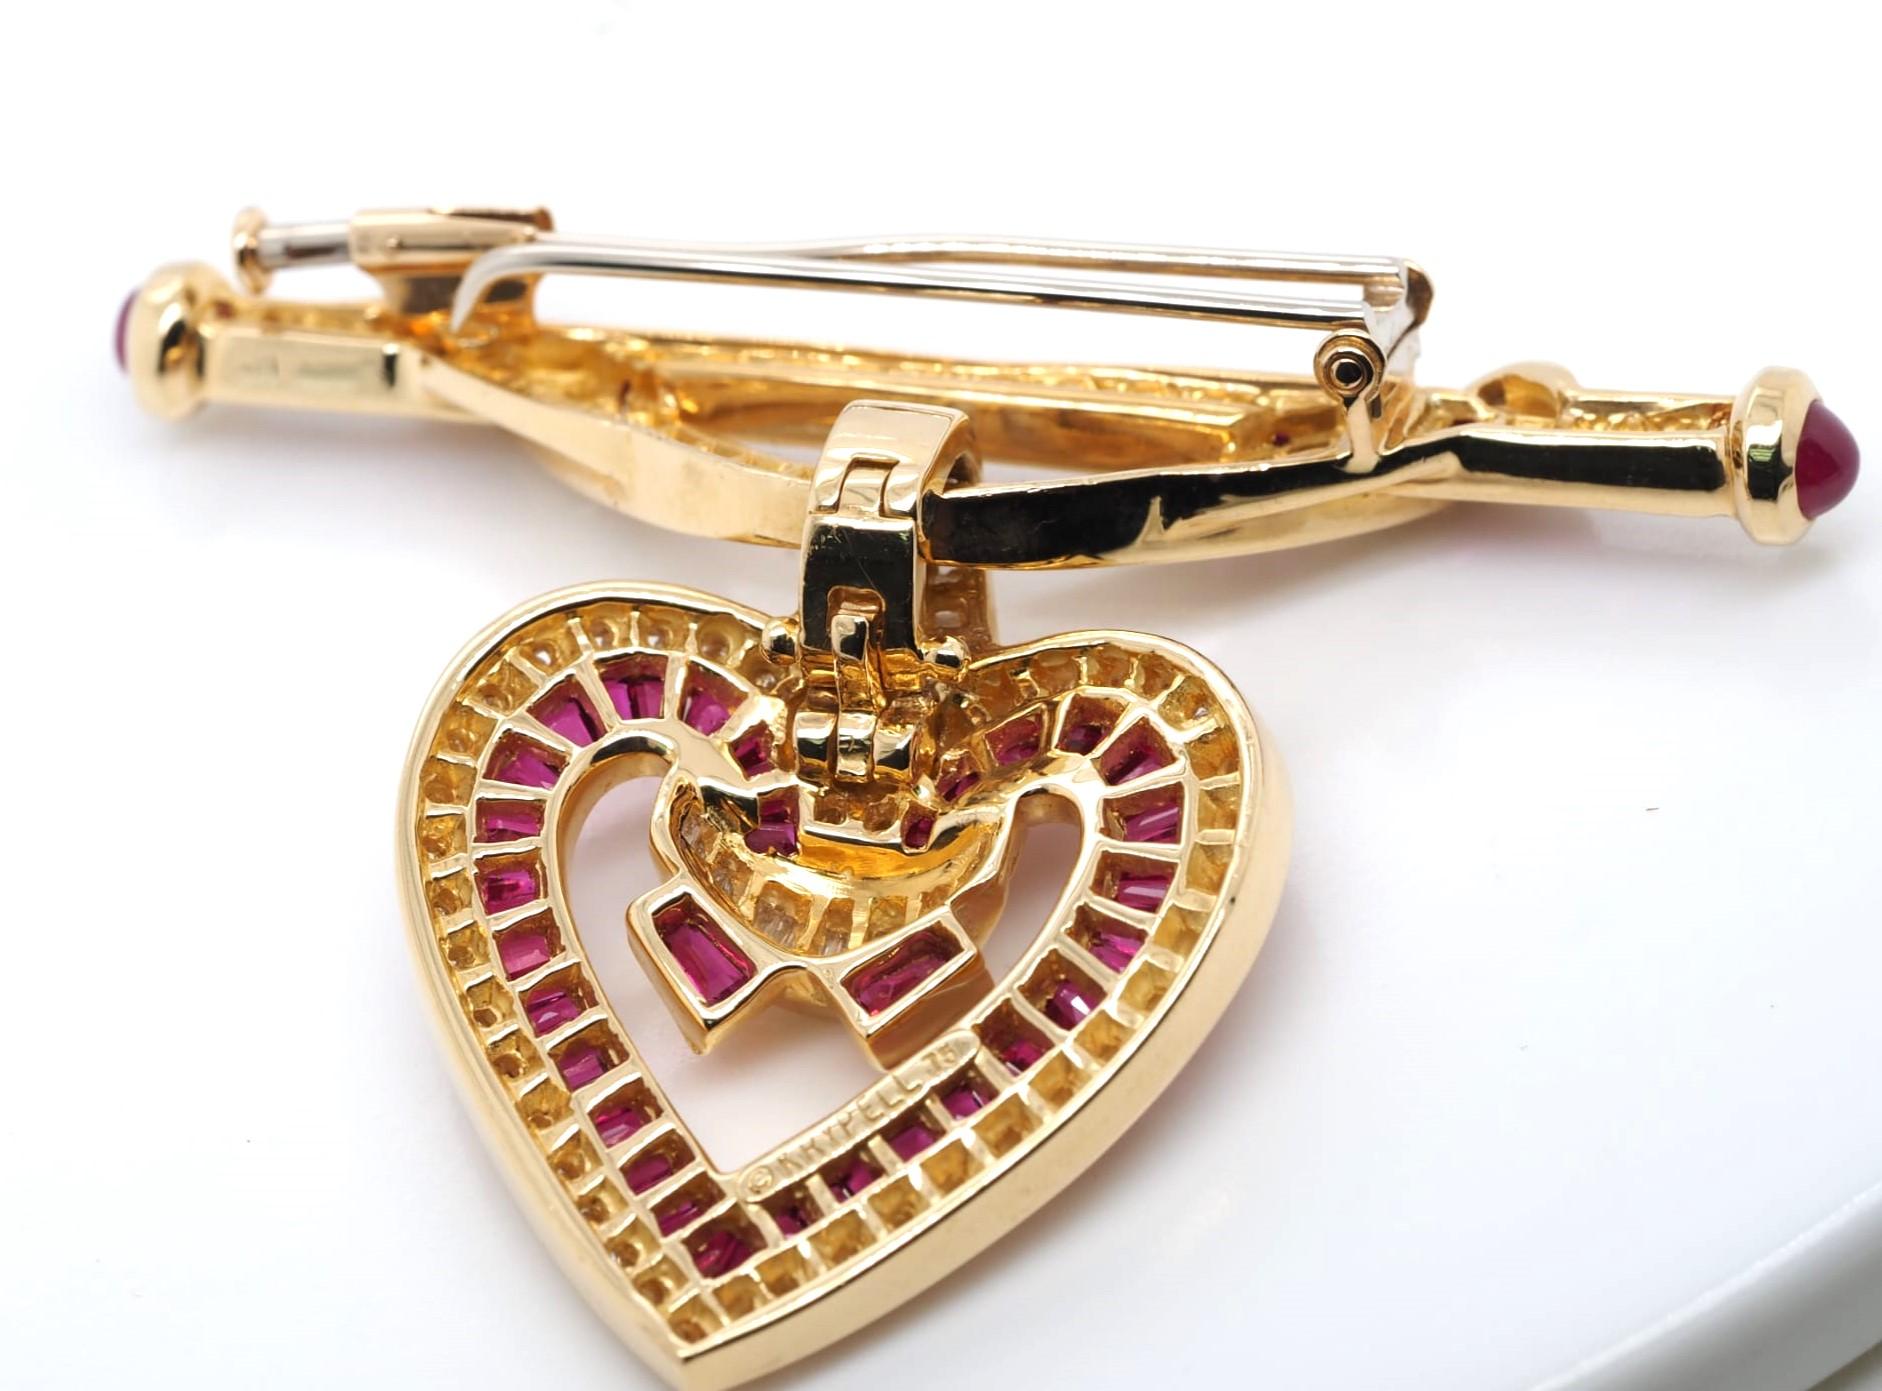 Women's or Men's Charles Krypell 18KT Gold 3.2 Ct Ruby 2.67 Ct Diamond Pendant Brooch Pin For Sale